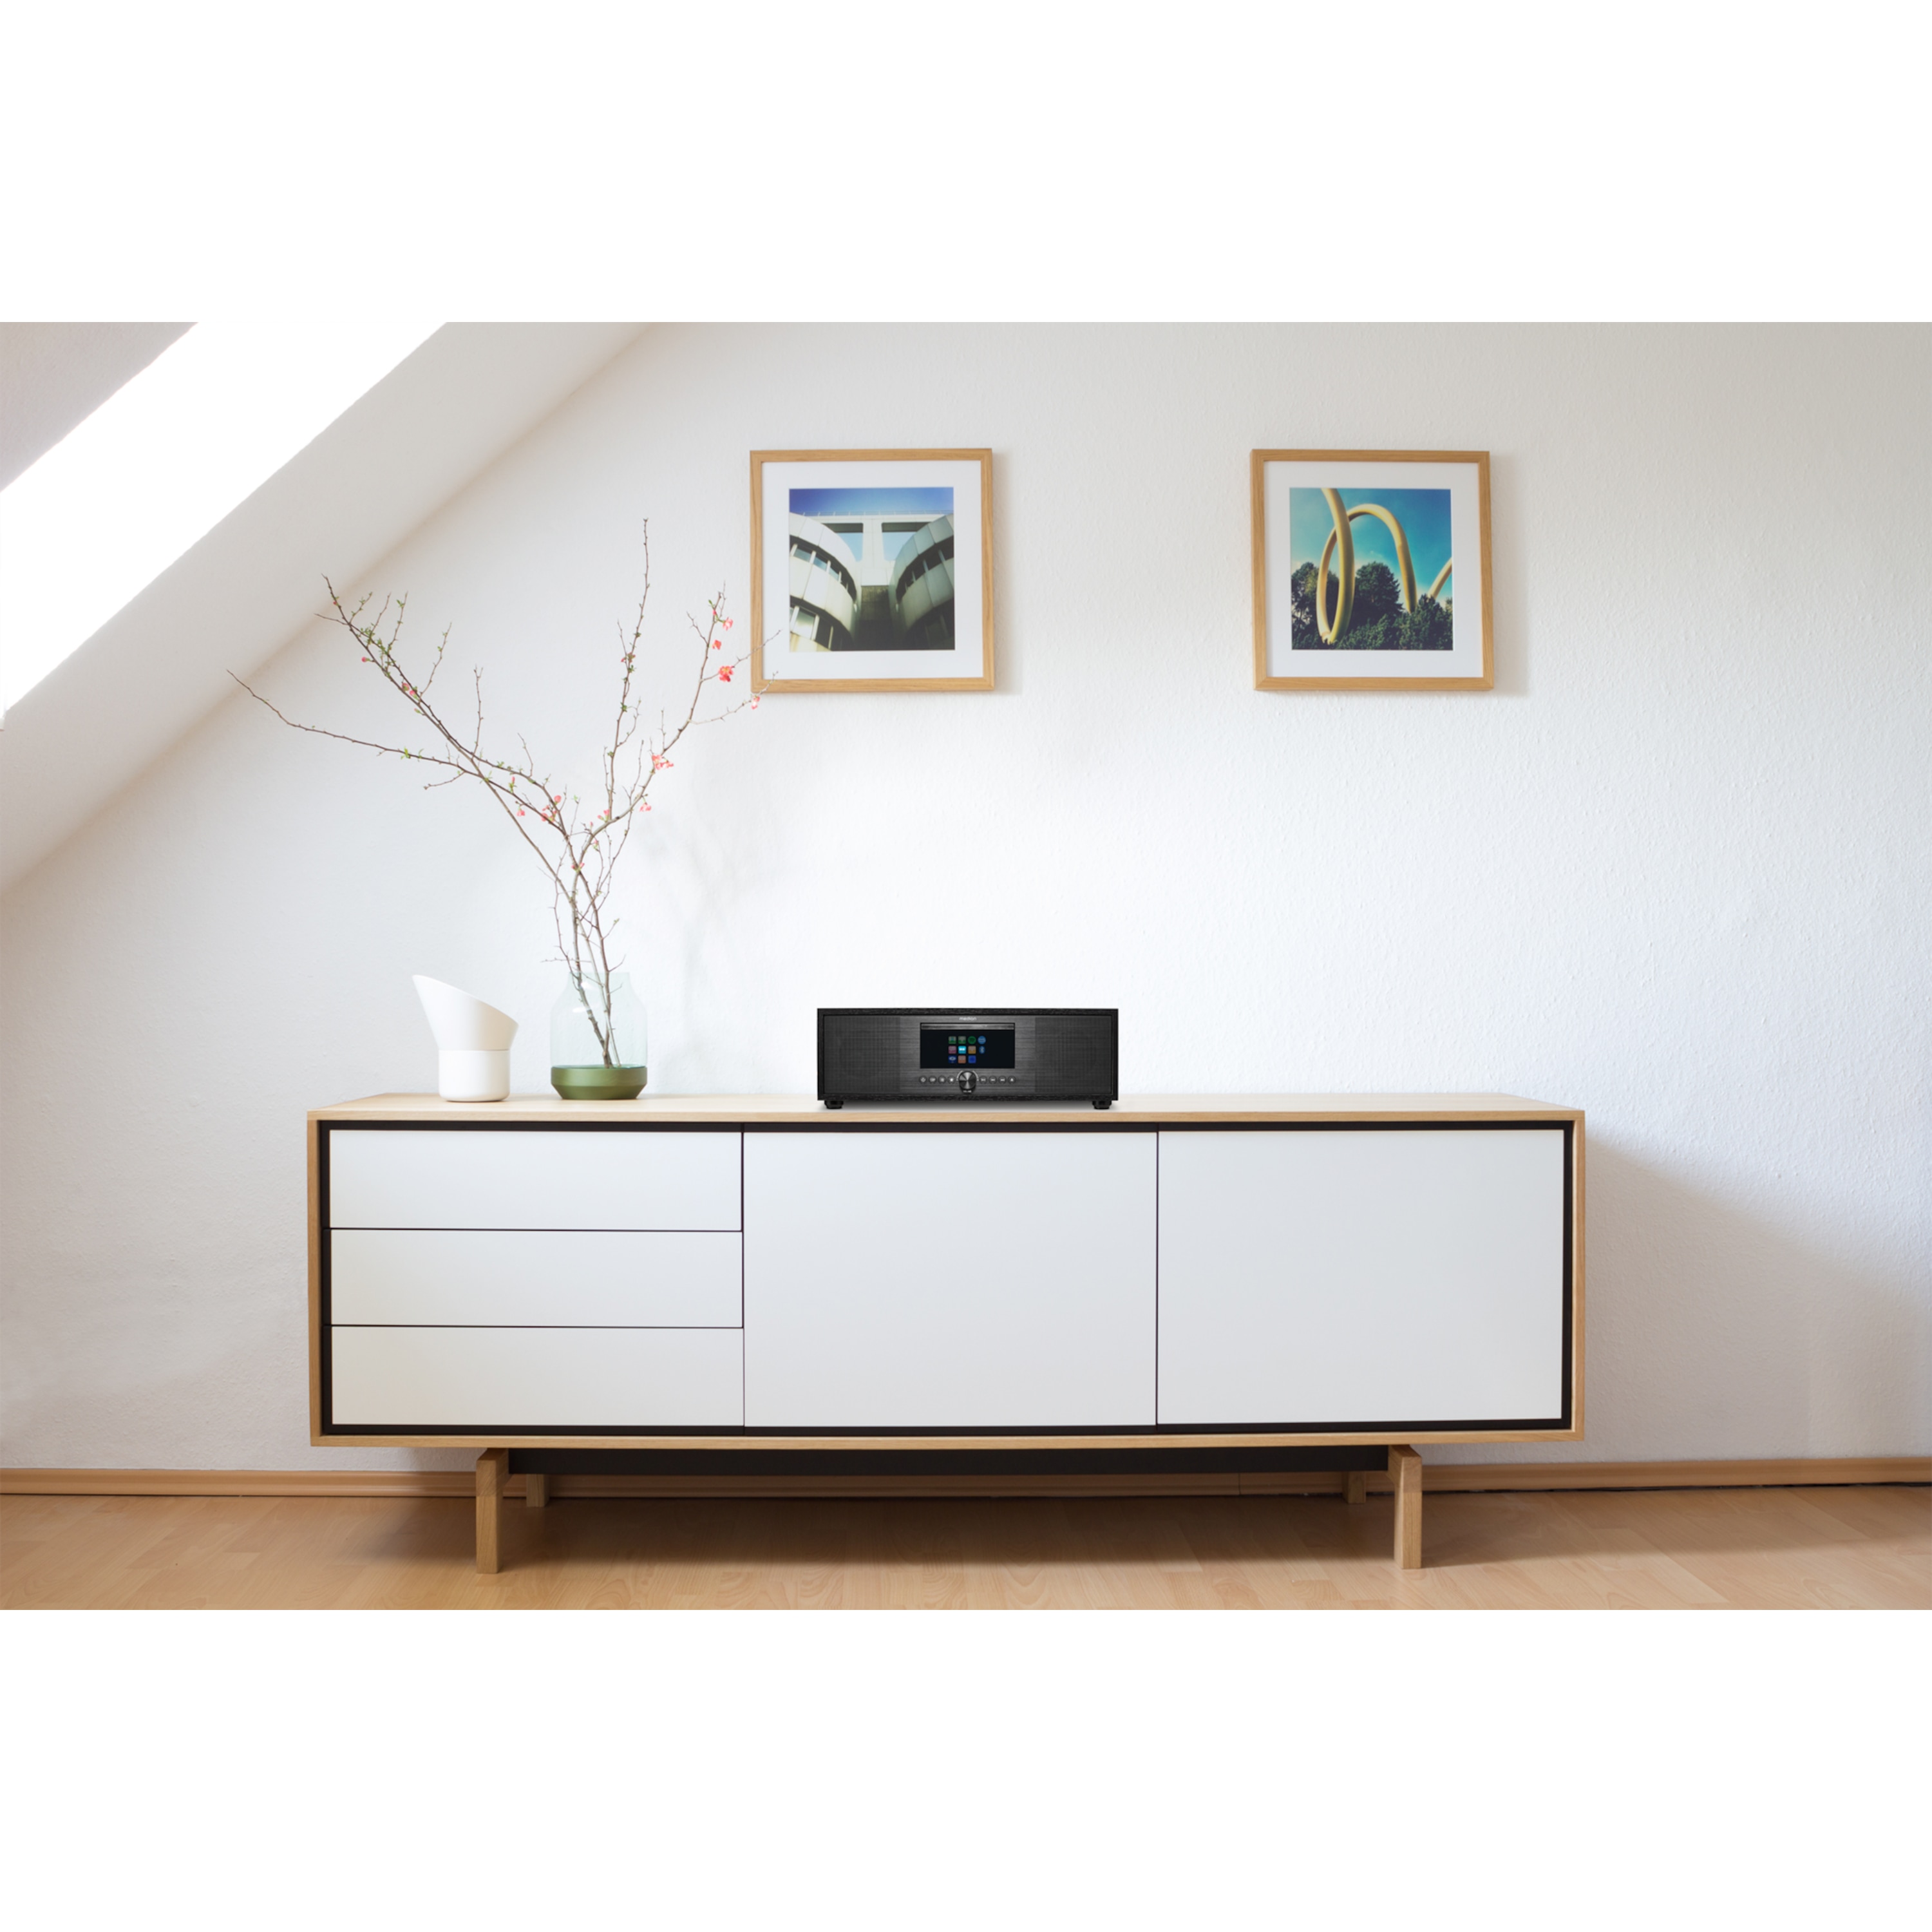 MEDION® LIFE® P66400 All-in-One Audio System anthrazit, LCD-Display 7,1 (2.8''), Internet/DAB+/PLL-UKW Radio, CD/MP3-Player, Bluetooth®, WLAN, RDS, 2.1 Soundsystem, 2 x 20 W + 40 W RMS